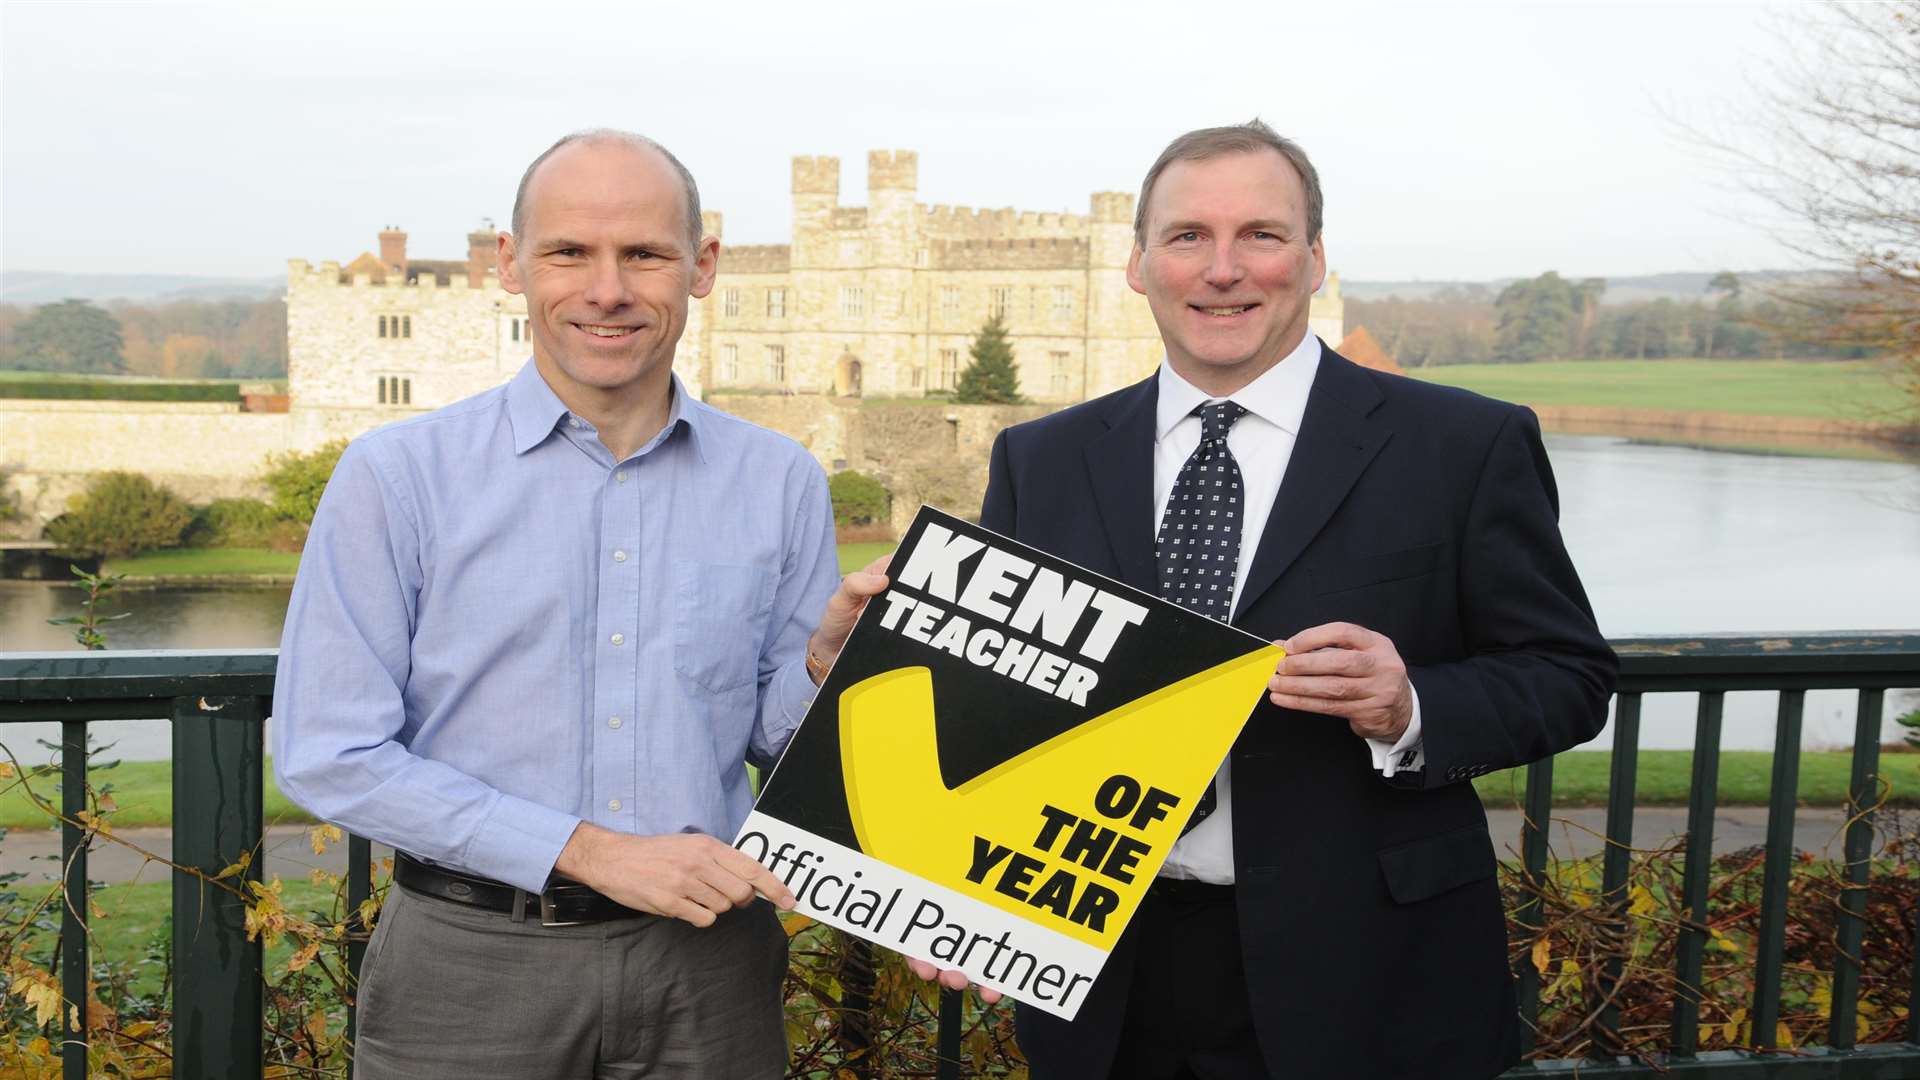 Seven departments from the University of Kent have pledged support for the Kent Teacher of the Year Awards 2015 including the School of Physical Sciences (Gavin Mountjoy, left) and the School of Biosciences (Dr Anthony Baines).